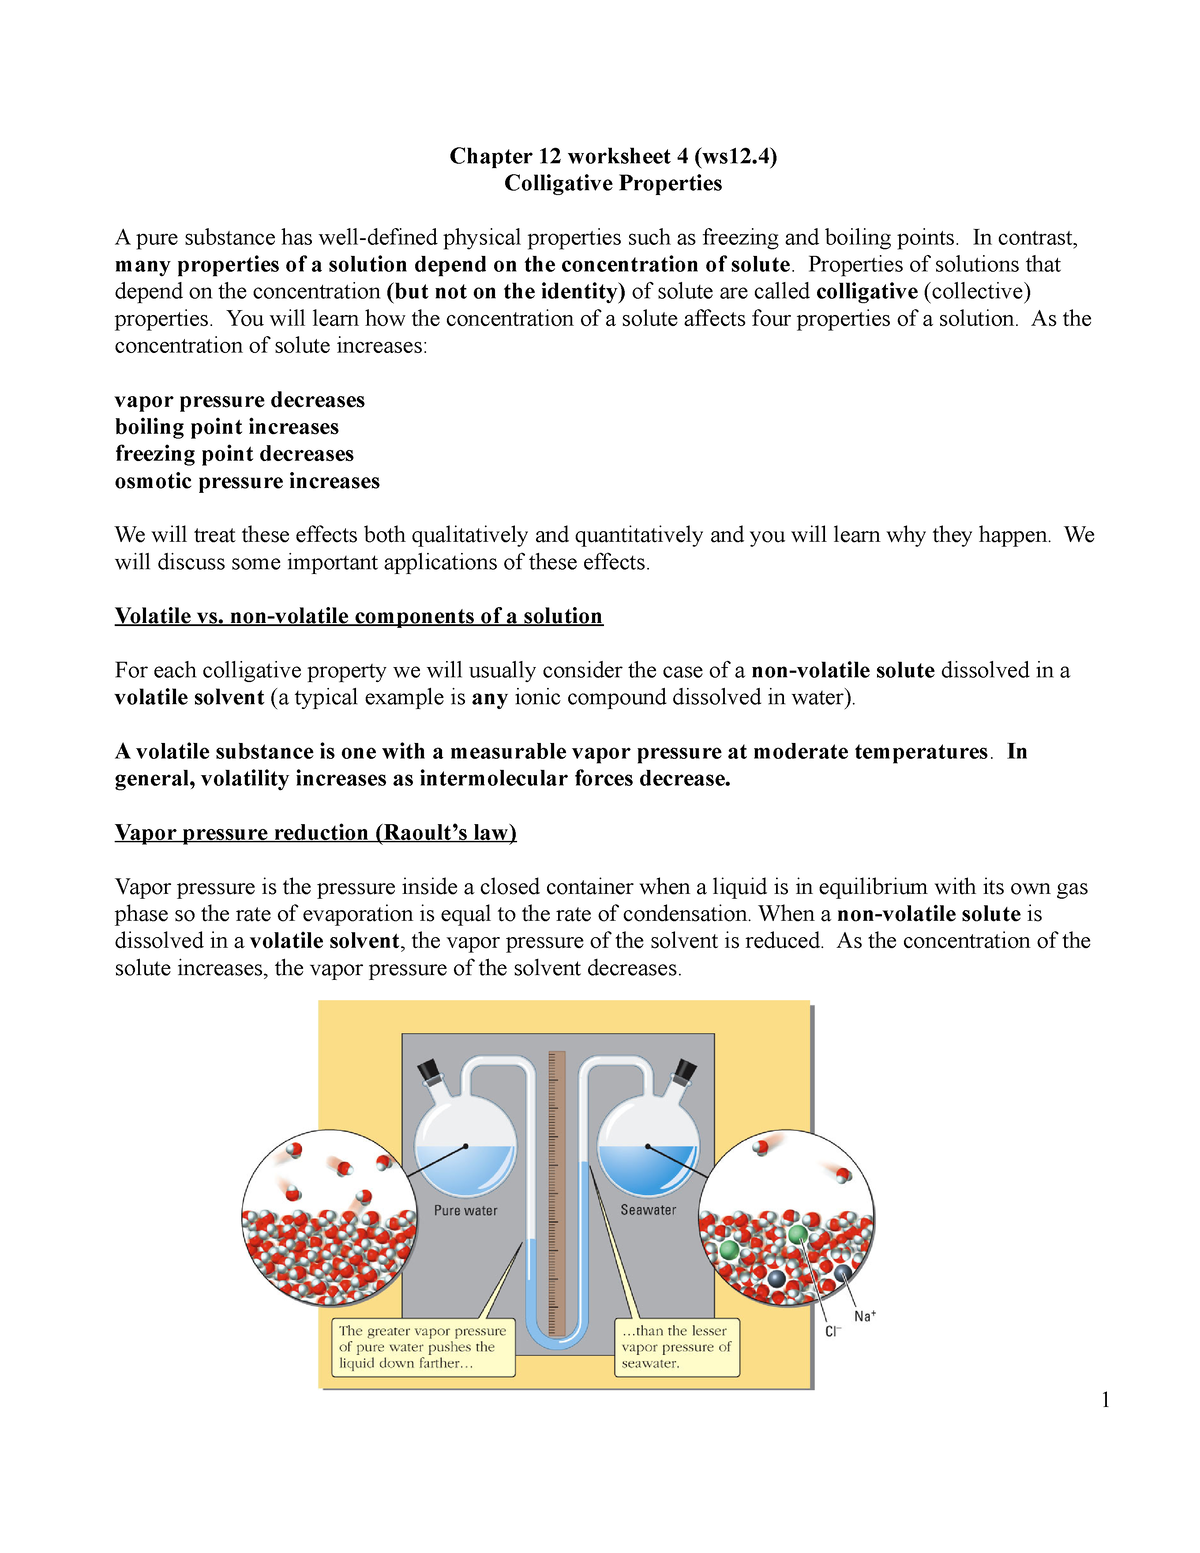 answerkey-for-chem-chapter-12-worksheet-4-ws12-colligative-properties-a-pure-substance-has